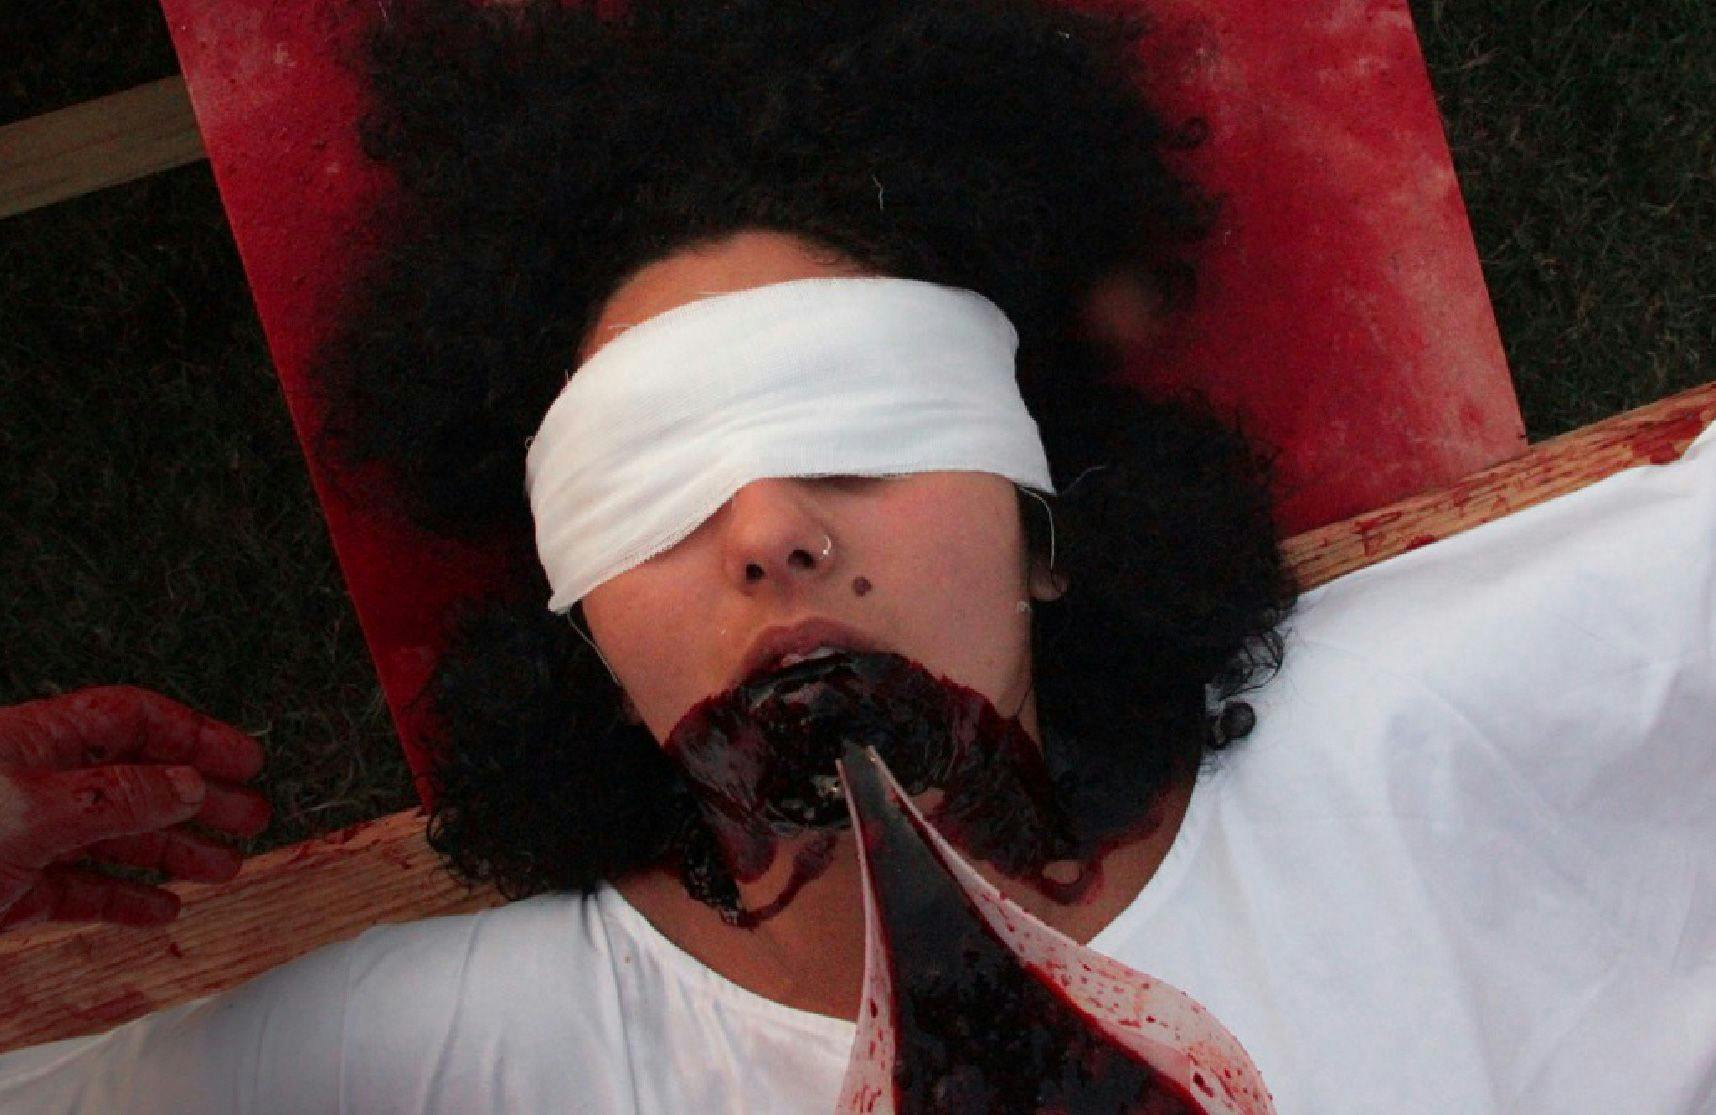 A woman lays blind folded while blood is poured into her mouth overflowing onto her chin